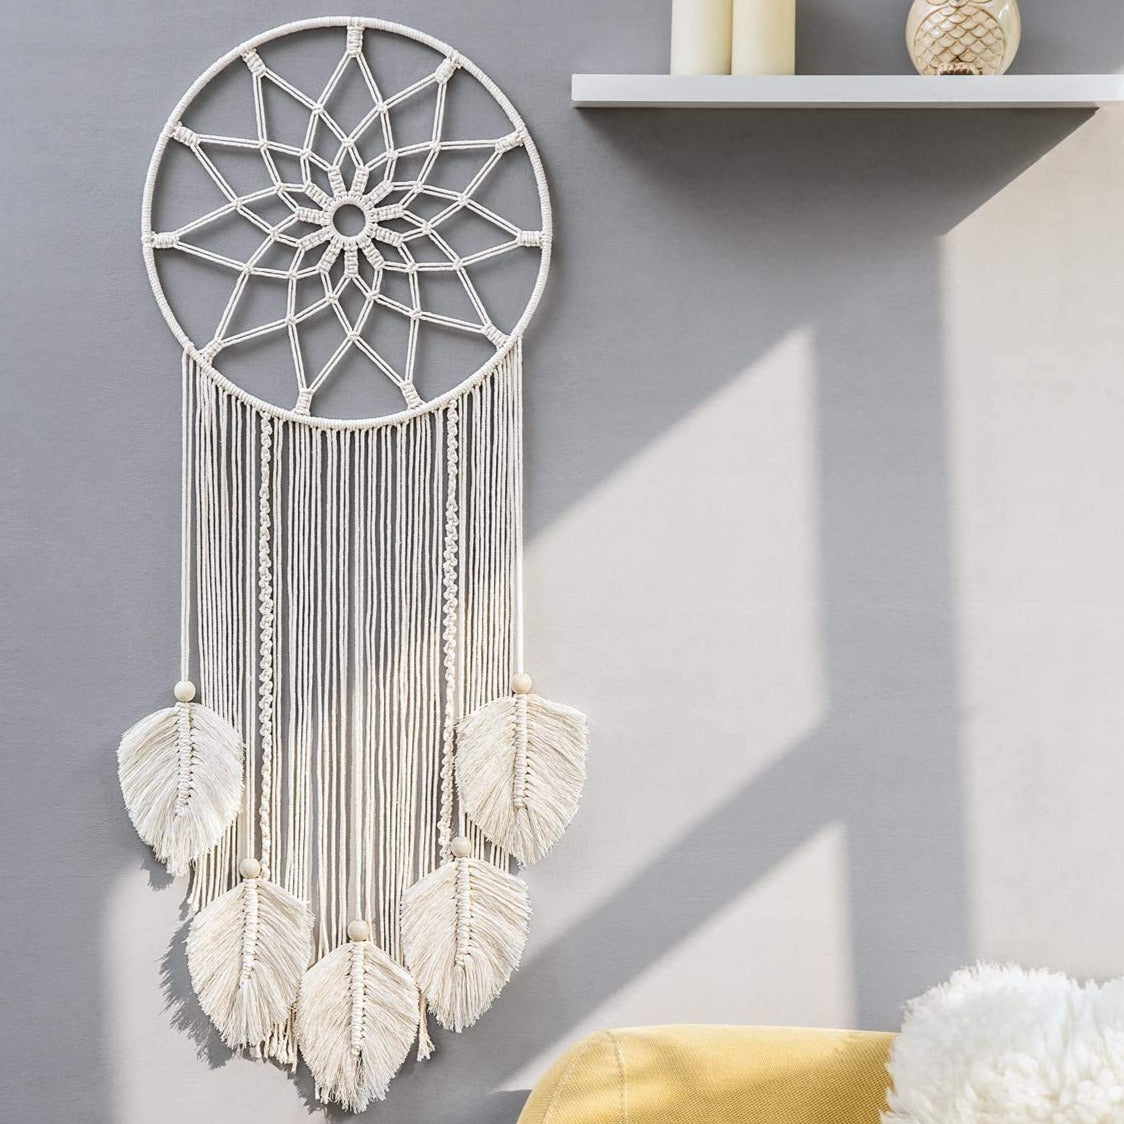 SYOSI Macrame Dream Catcher Woven Feather Large Wall Hanging Handmade Dreamcatcher Boho Tassels Art Woven Decoration Home Decor Ornament Craft Gift Geometric Beautiful Wall Art for Apartment